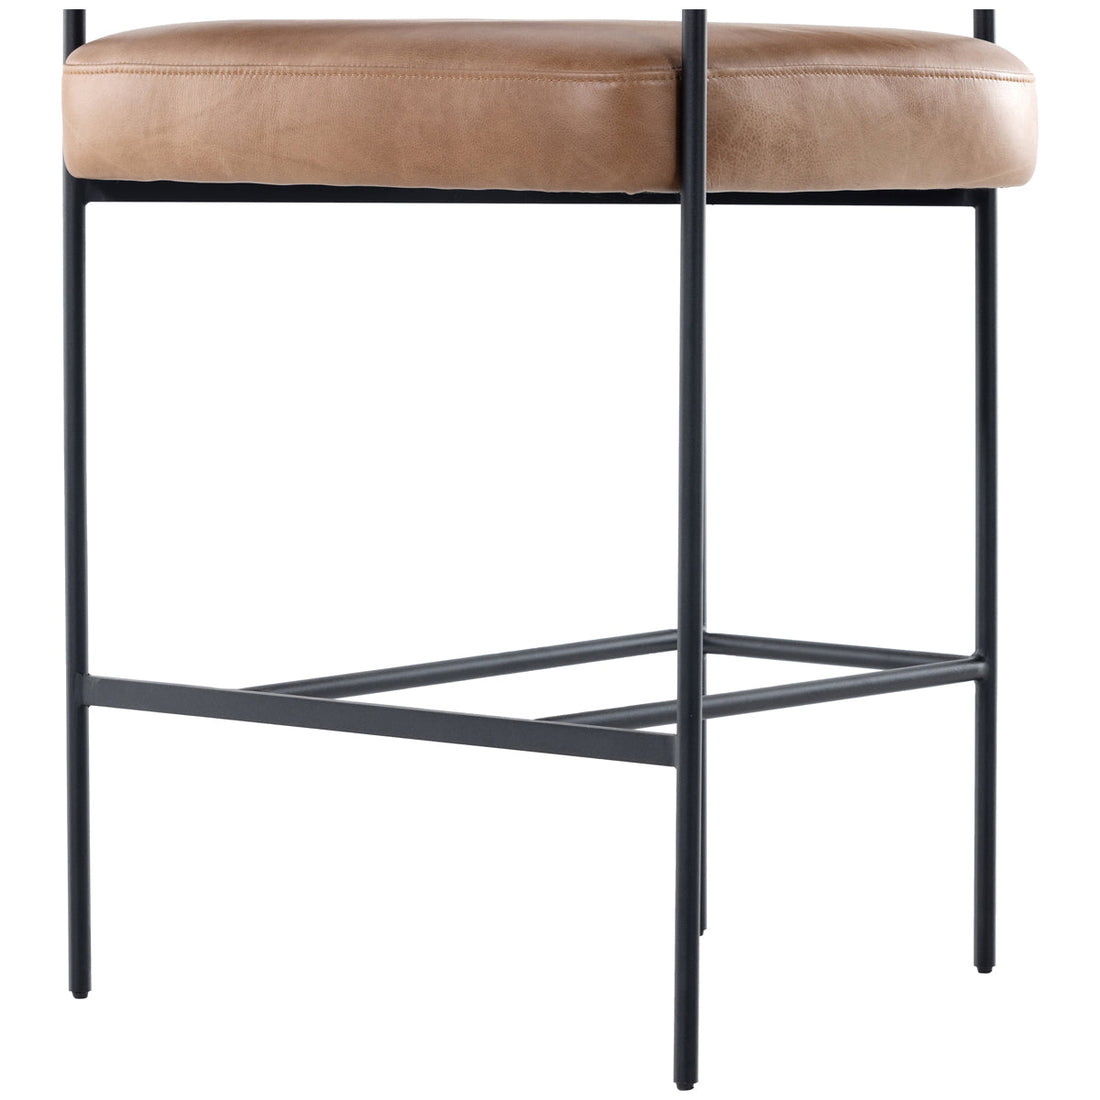 Four Hands Grayson Carrie Counter Stool - Chaps Saddle